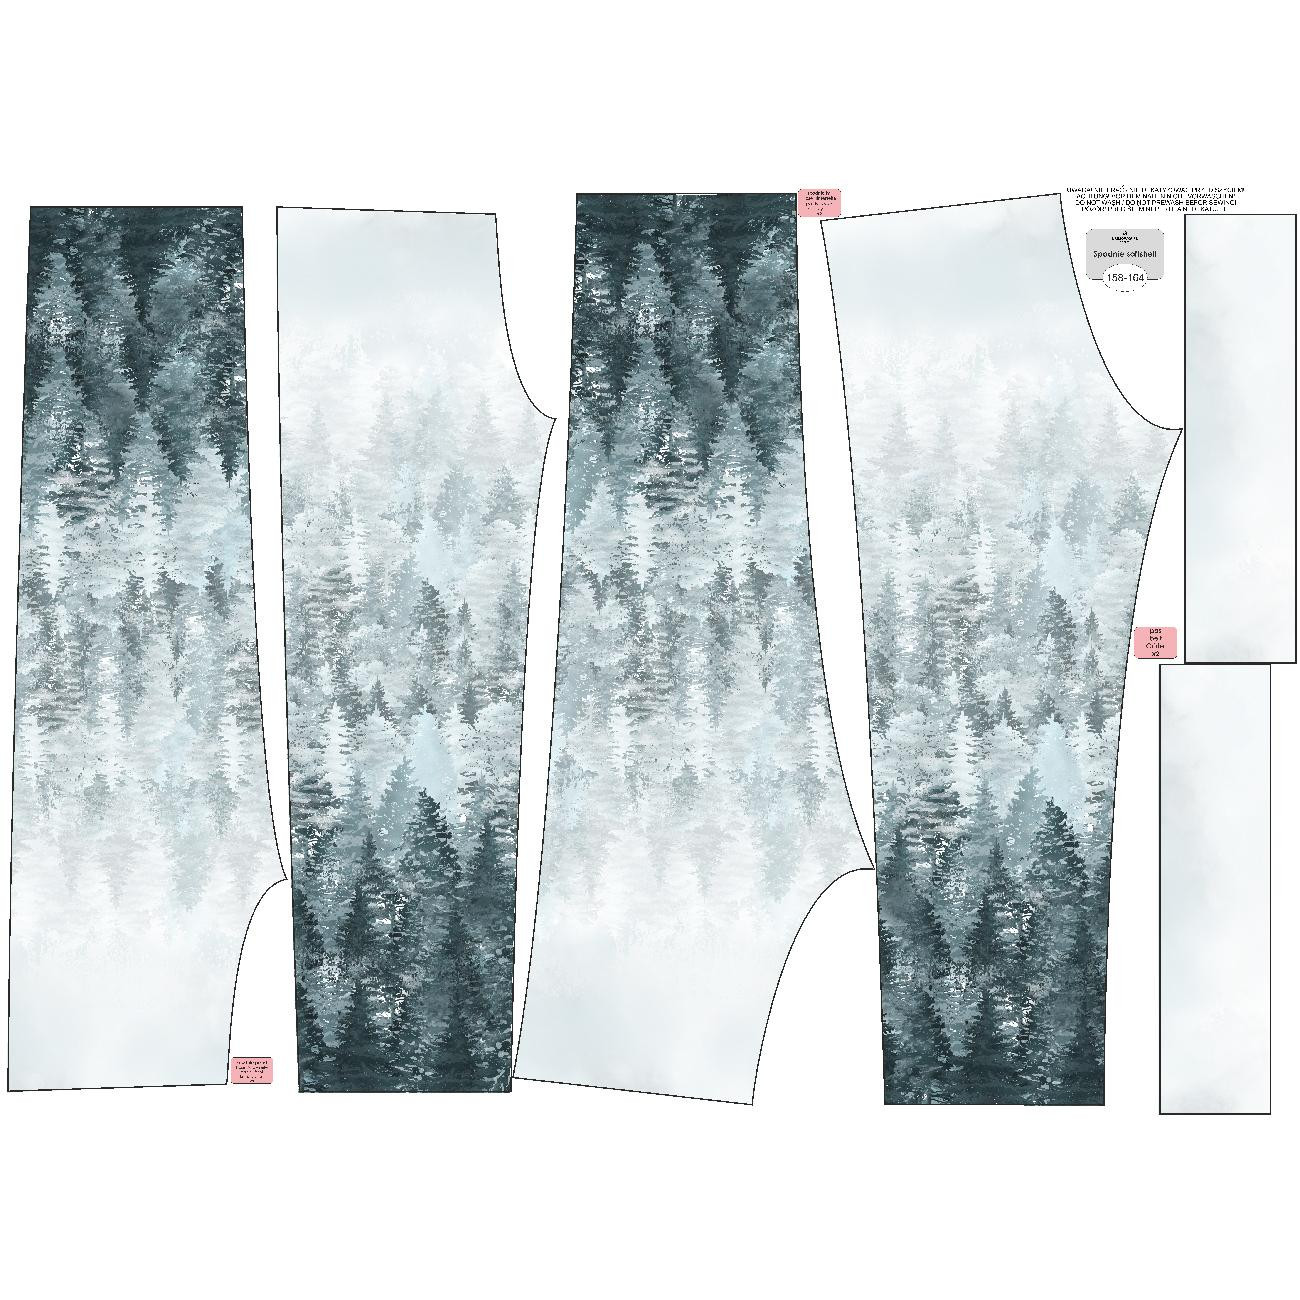 CHILDREN'S SOFTSHELL TROUSERS (YETI) - FORREST OMBRE (WINTER IN THE MOUNTAIN)